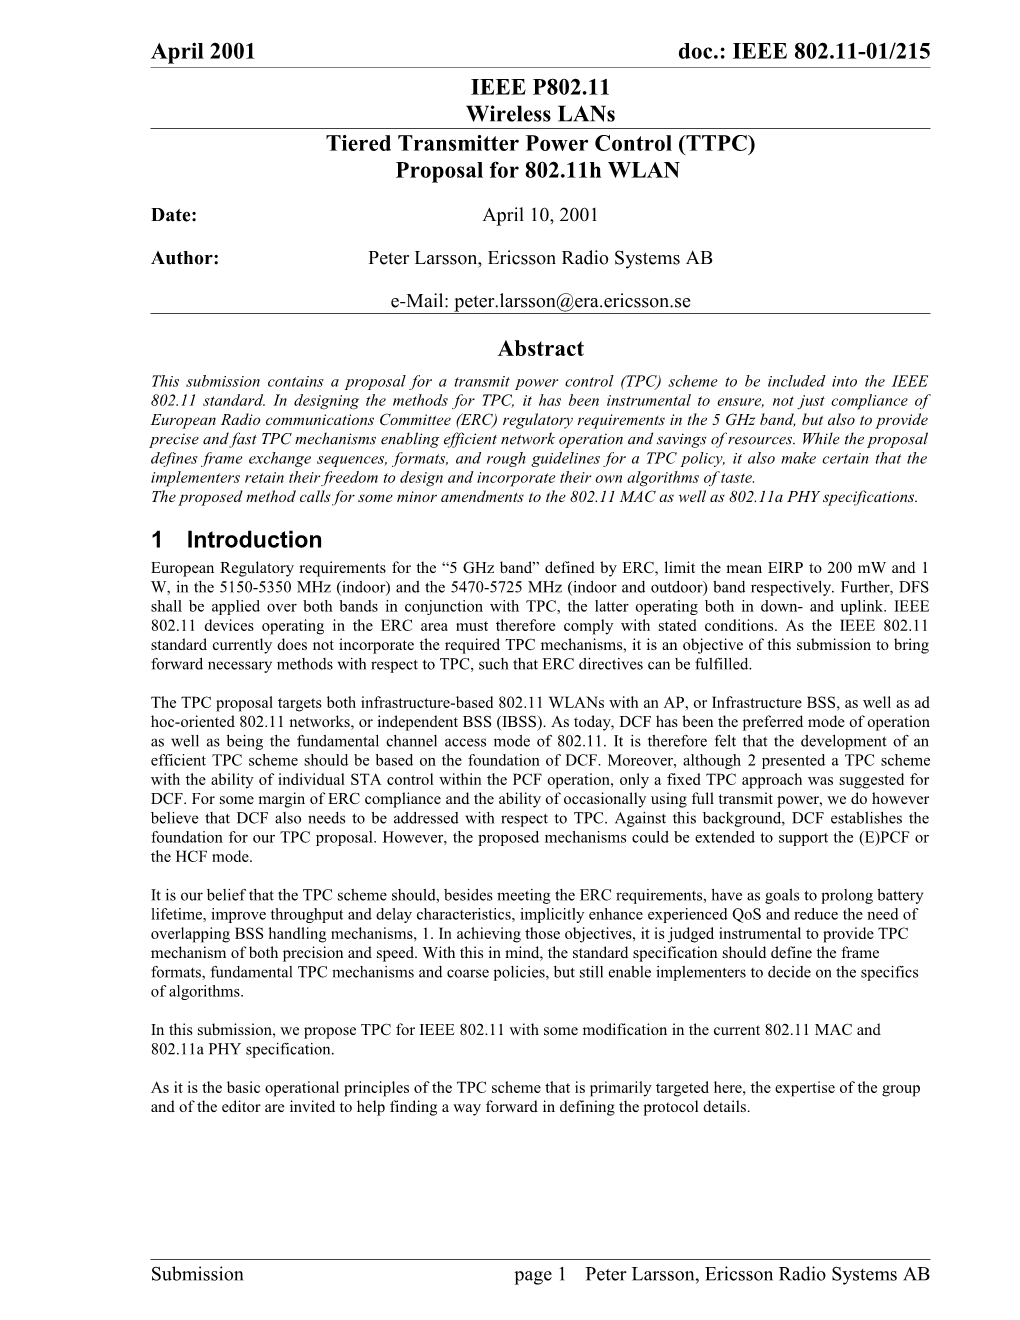 Tiered Transmitter Power Control (TTPC) Proposal for 802.11H WLAN